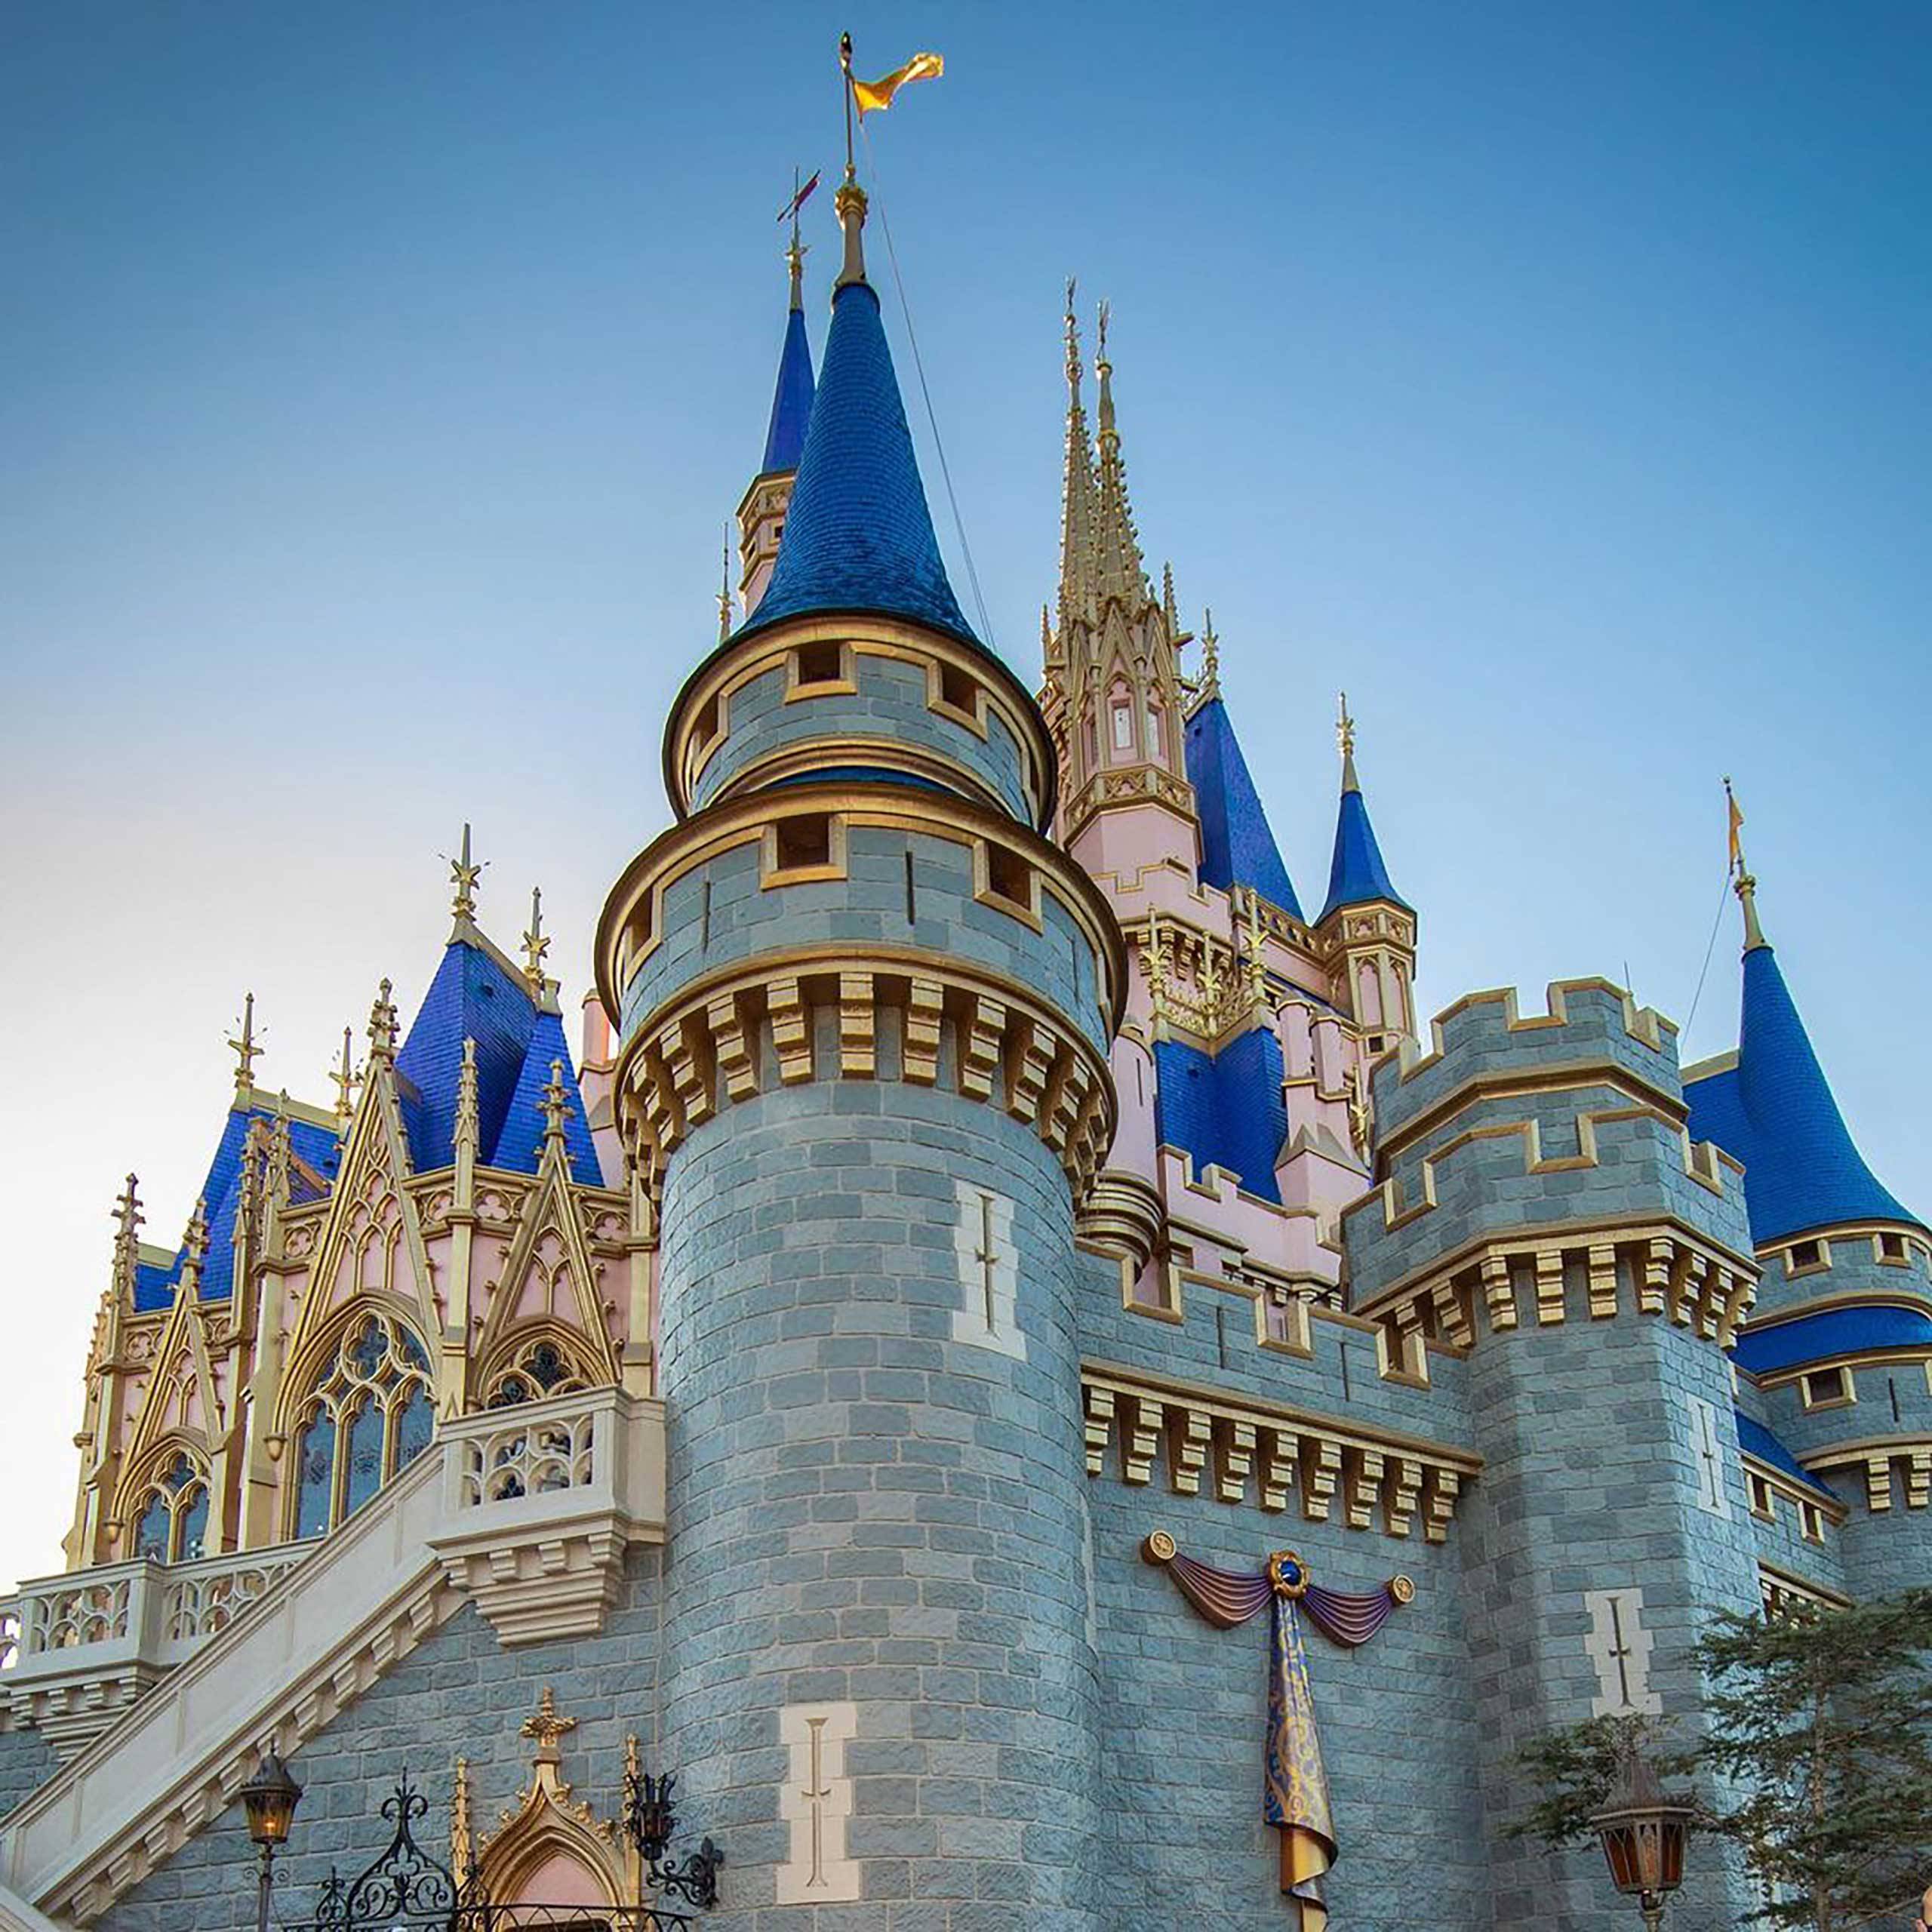 PHOTOS - First embellishment added to Cinderella Castle as part of the 50th anniversary makeover